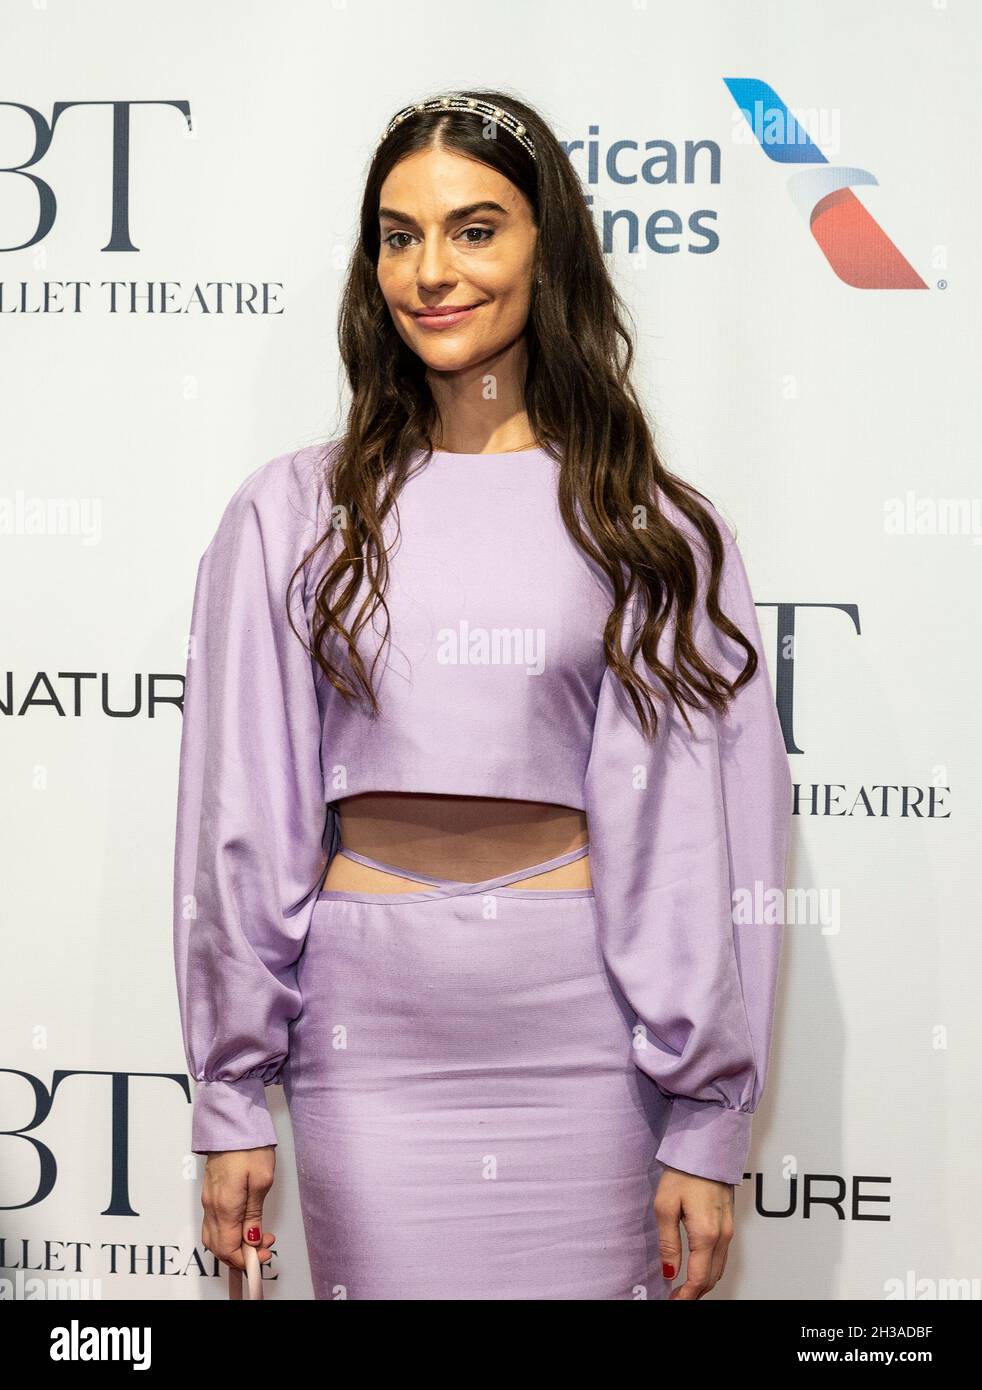 New York, United States. 26th Oct, 2021. Ariana Rockefeller attends American Ballet Theatre's Fall Gala at David Koch Theater at Lincoln Center (Photo by Lev Radin/Pacific Press) Credit: Pacific Press Media Production Corp./Alamy Live News Stock Photo